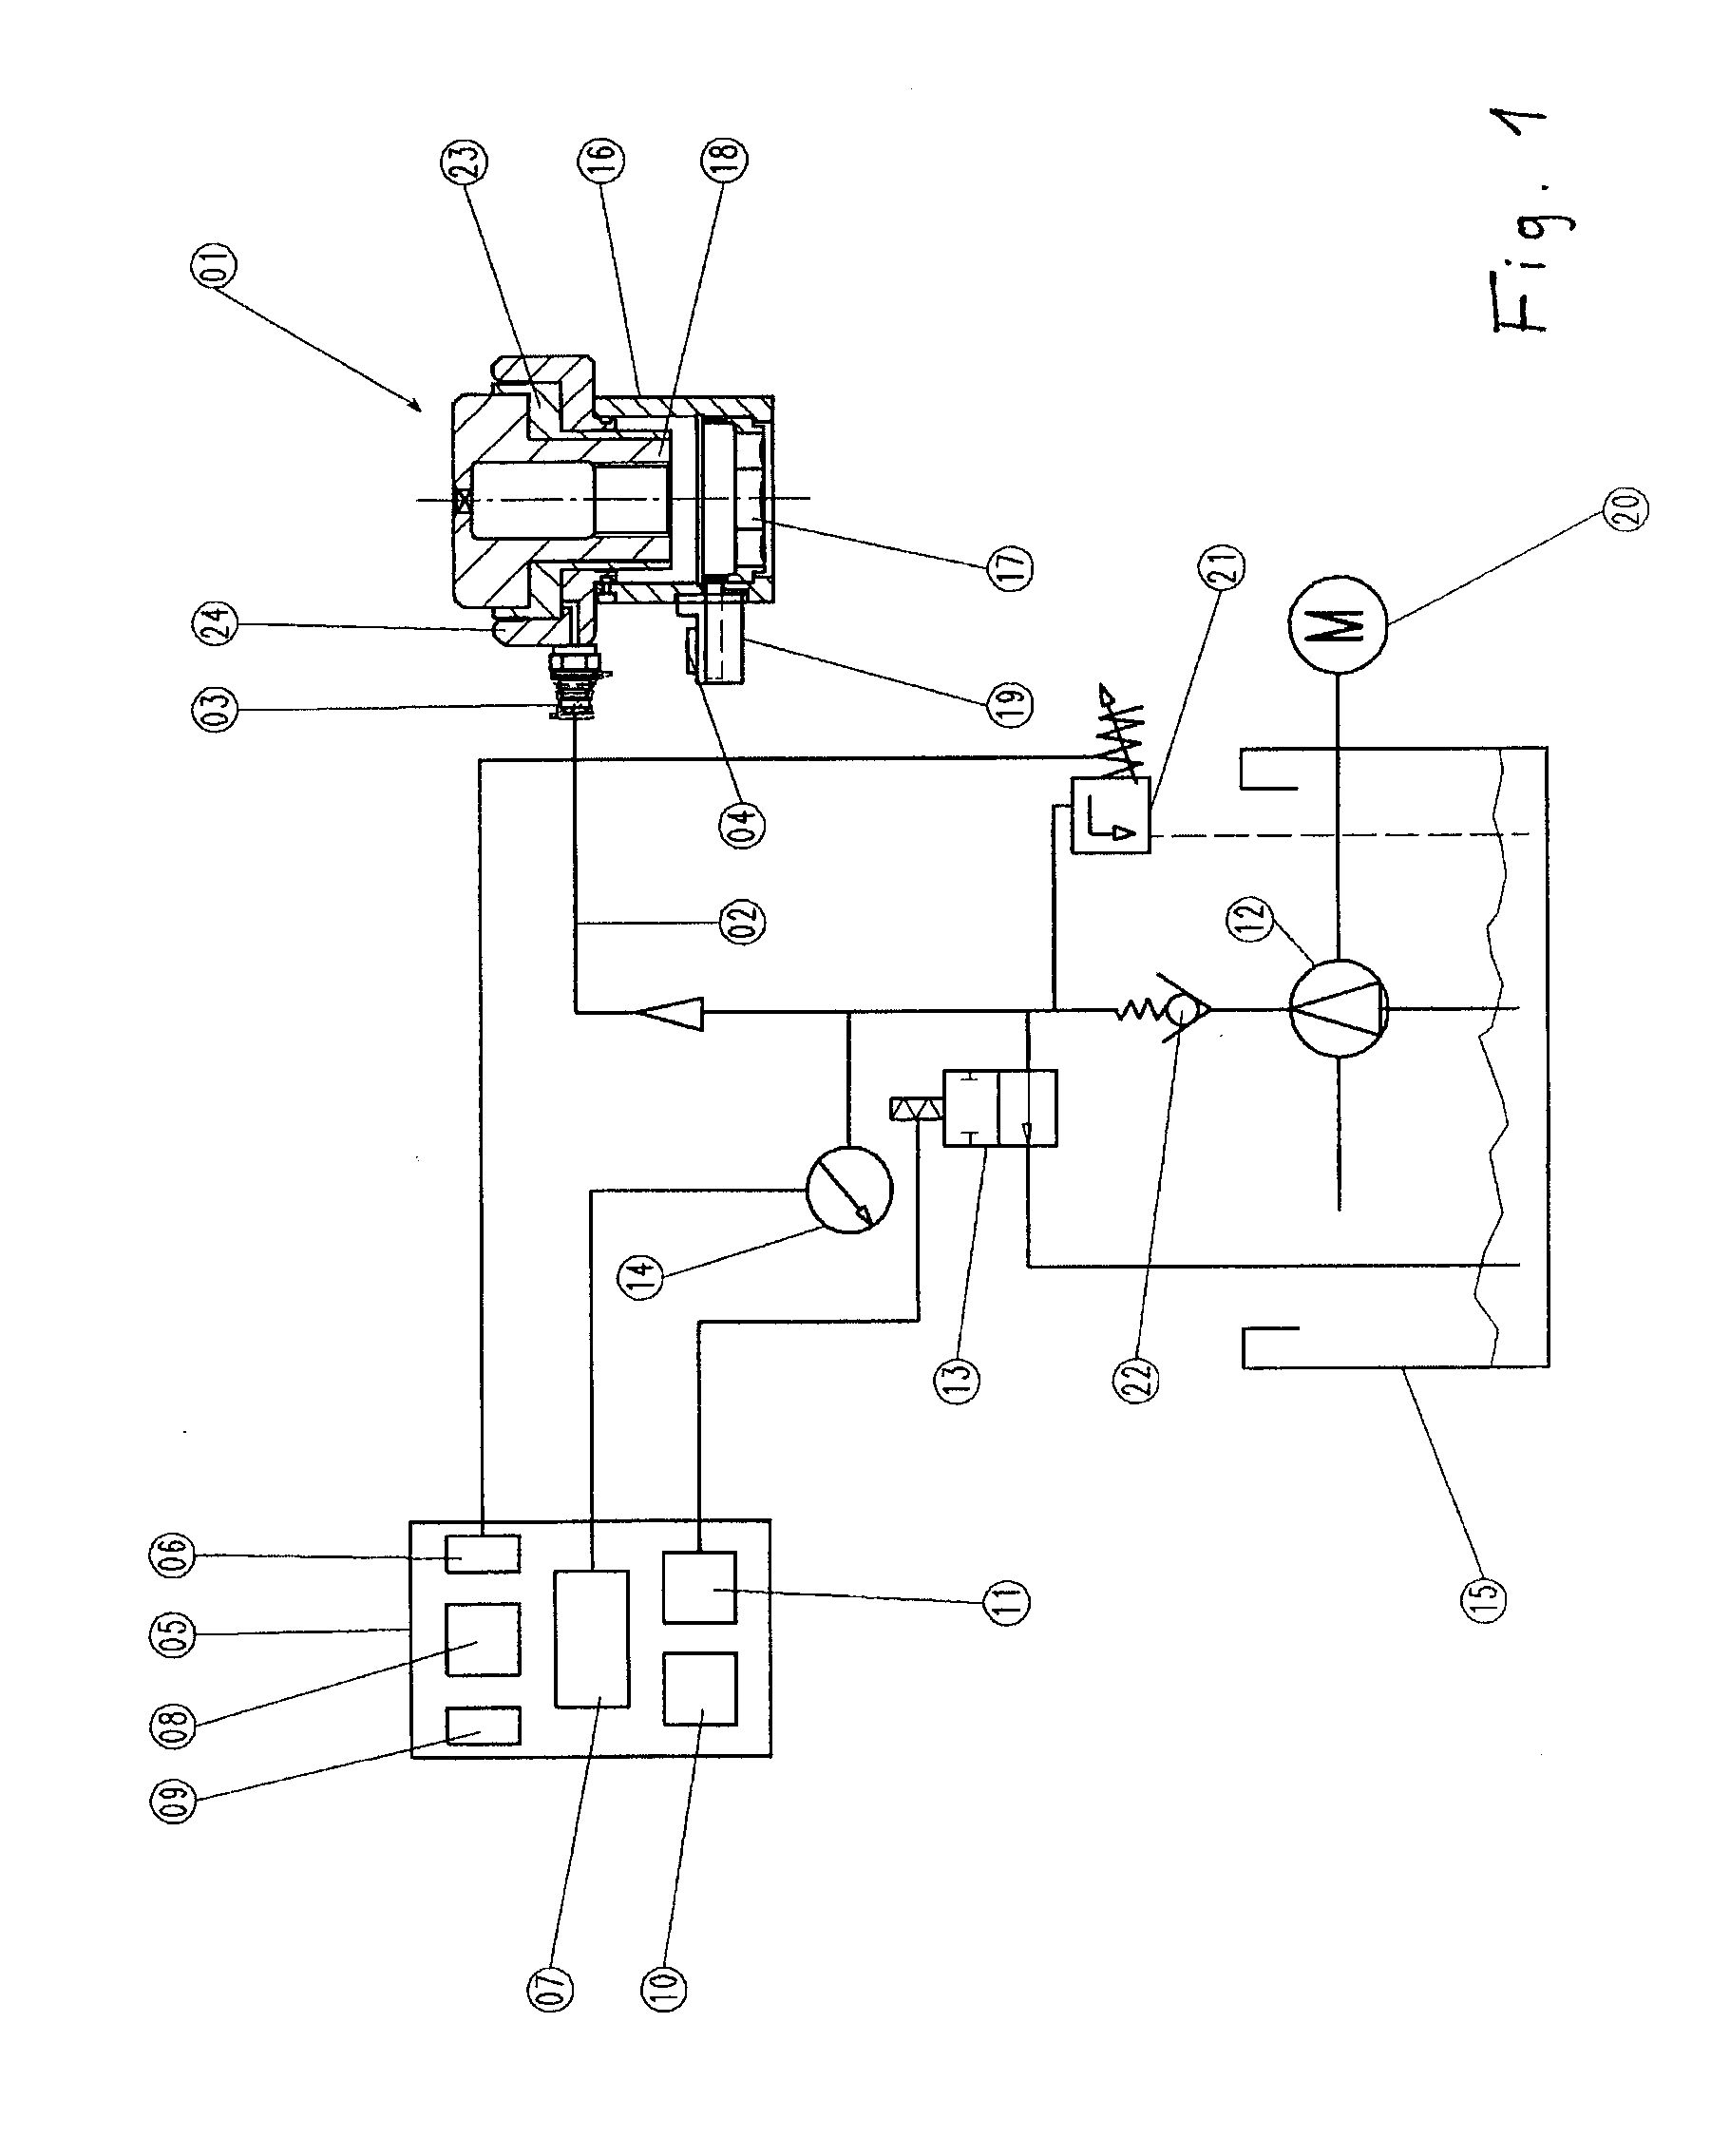 Hydraulic Bolt Tensioning Device and Method for Tightening Large Bolts by Means of a Hydraulic Bolt Tensioning Device